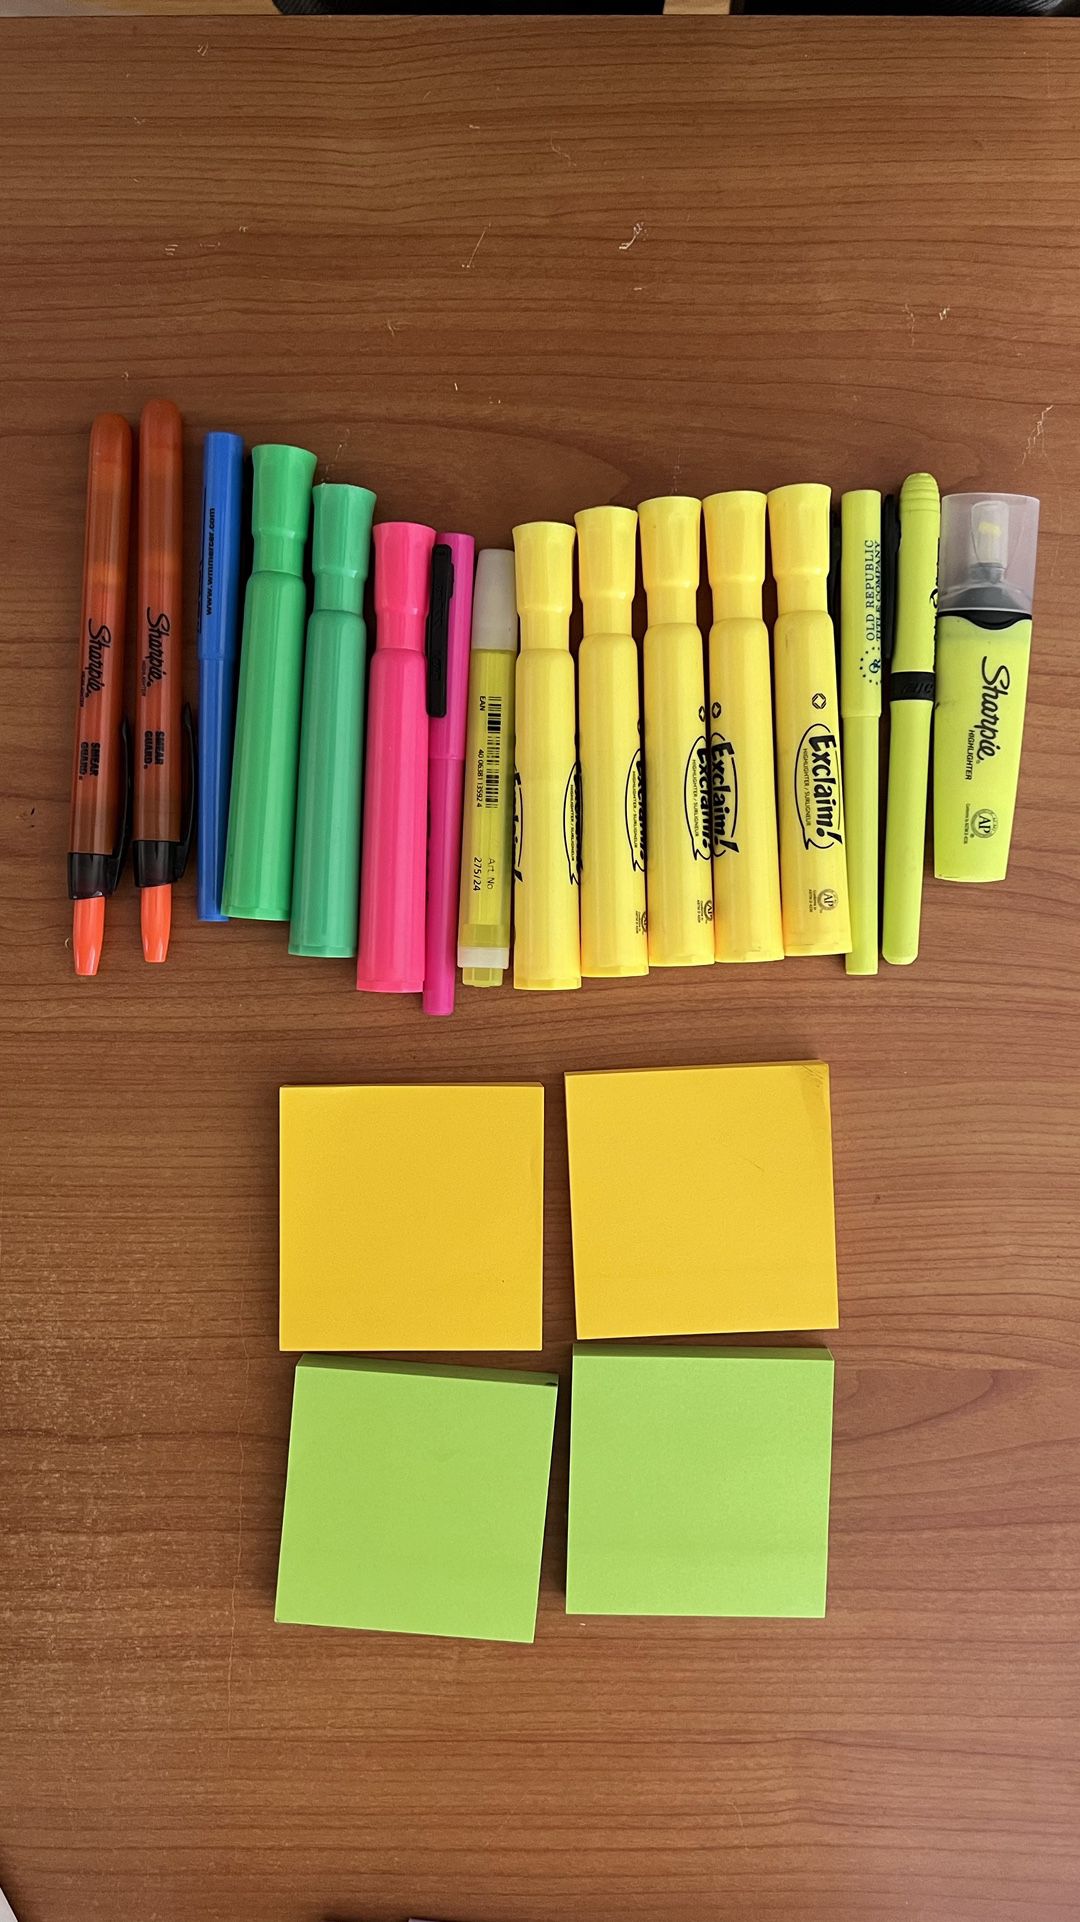 16 Highlighter And 4 Pad Of Post It Sticker